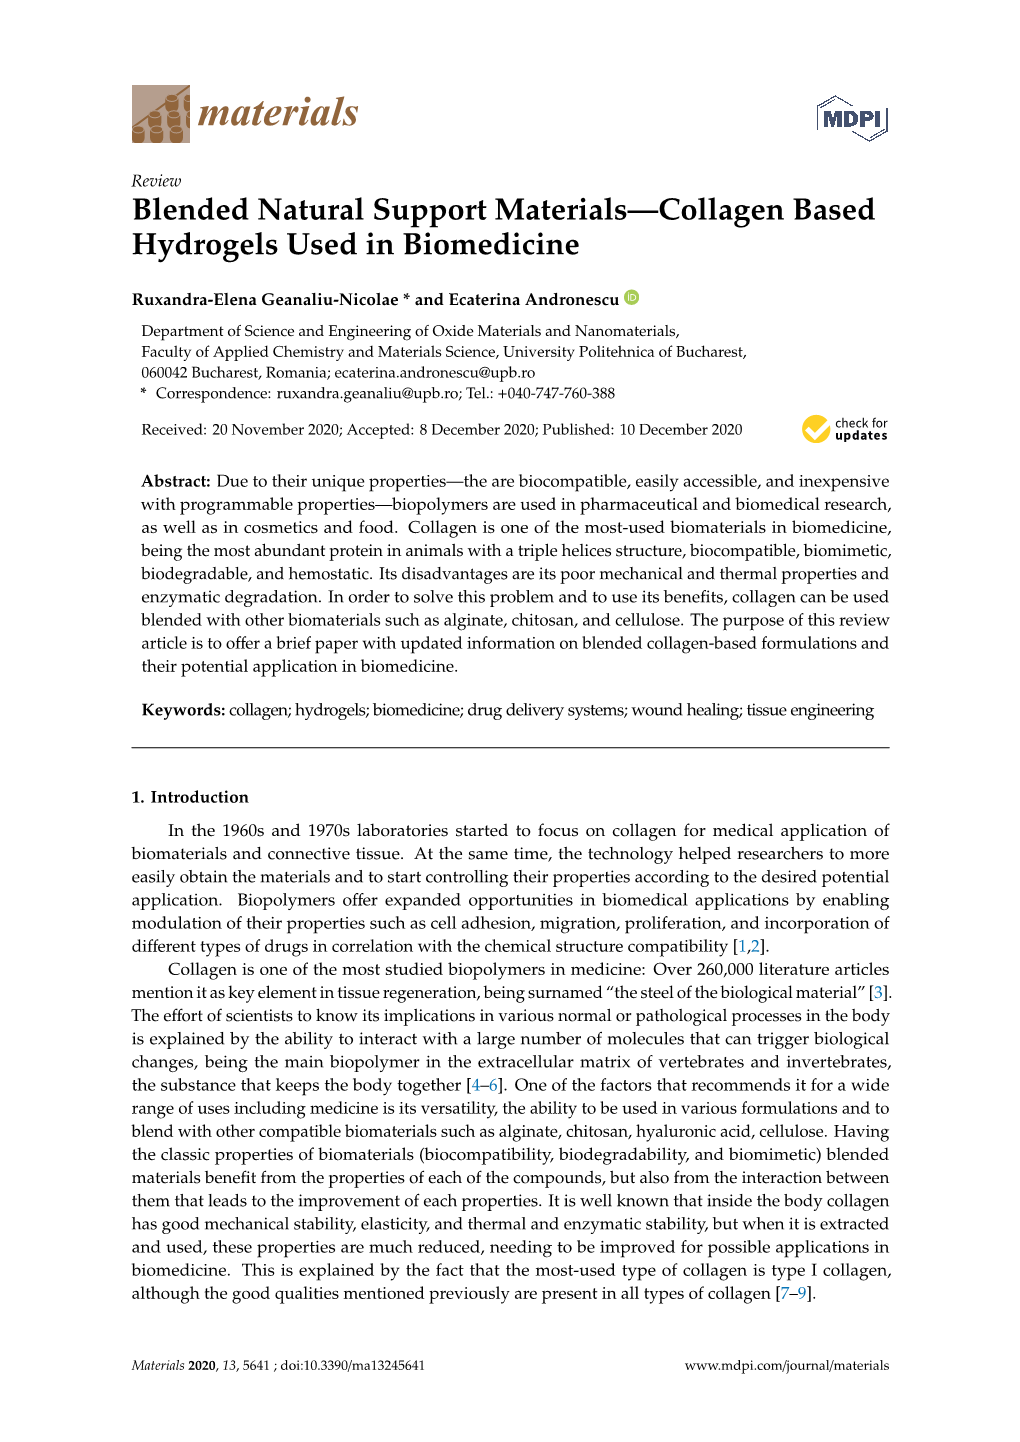 Blended Natural Support Materials—Collagen Based Hydrogels Used in Biomedicine